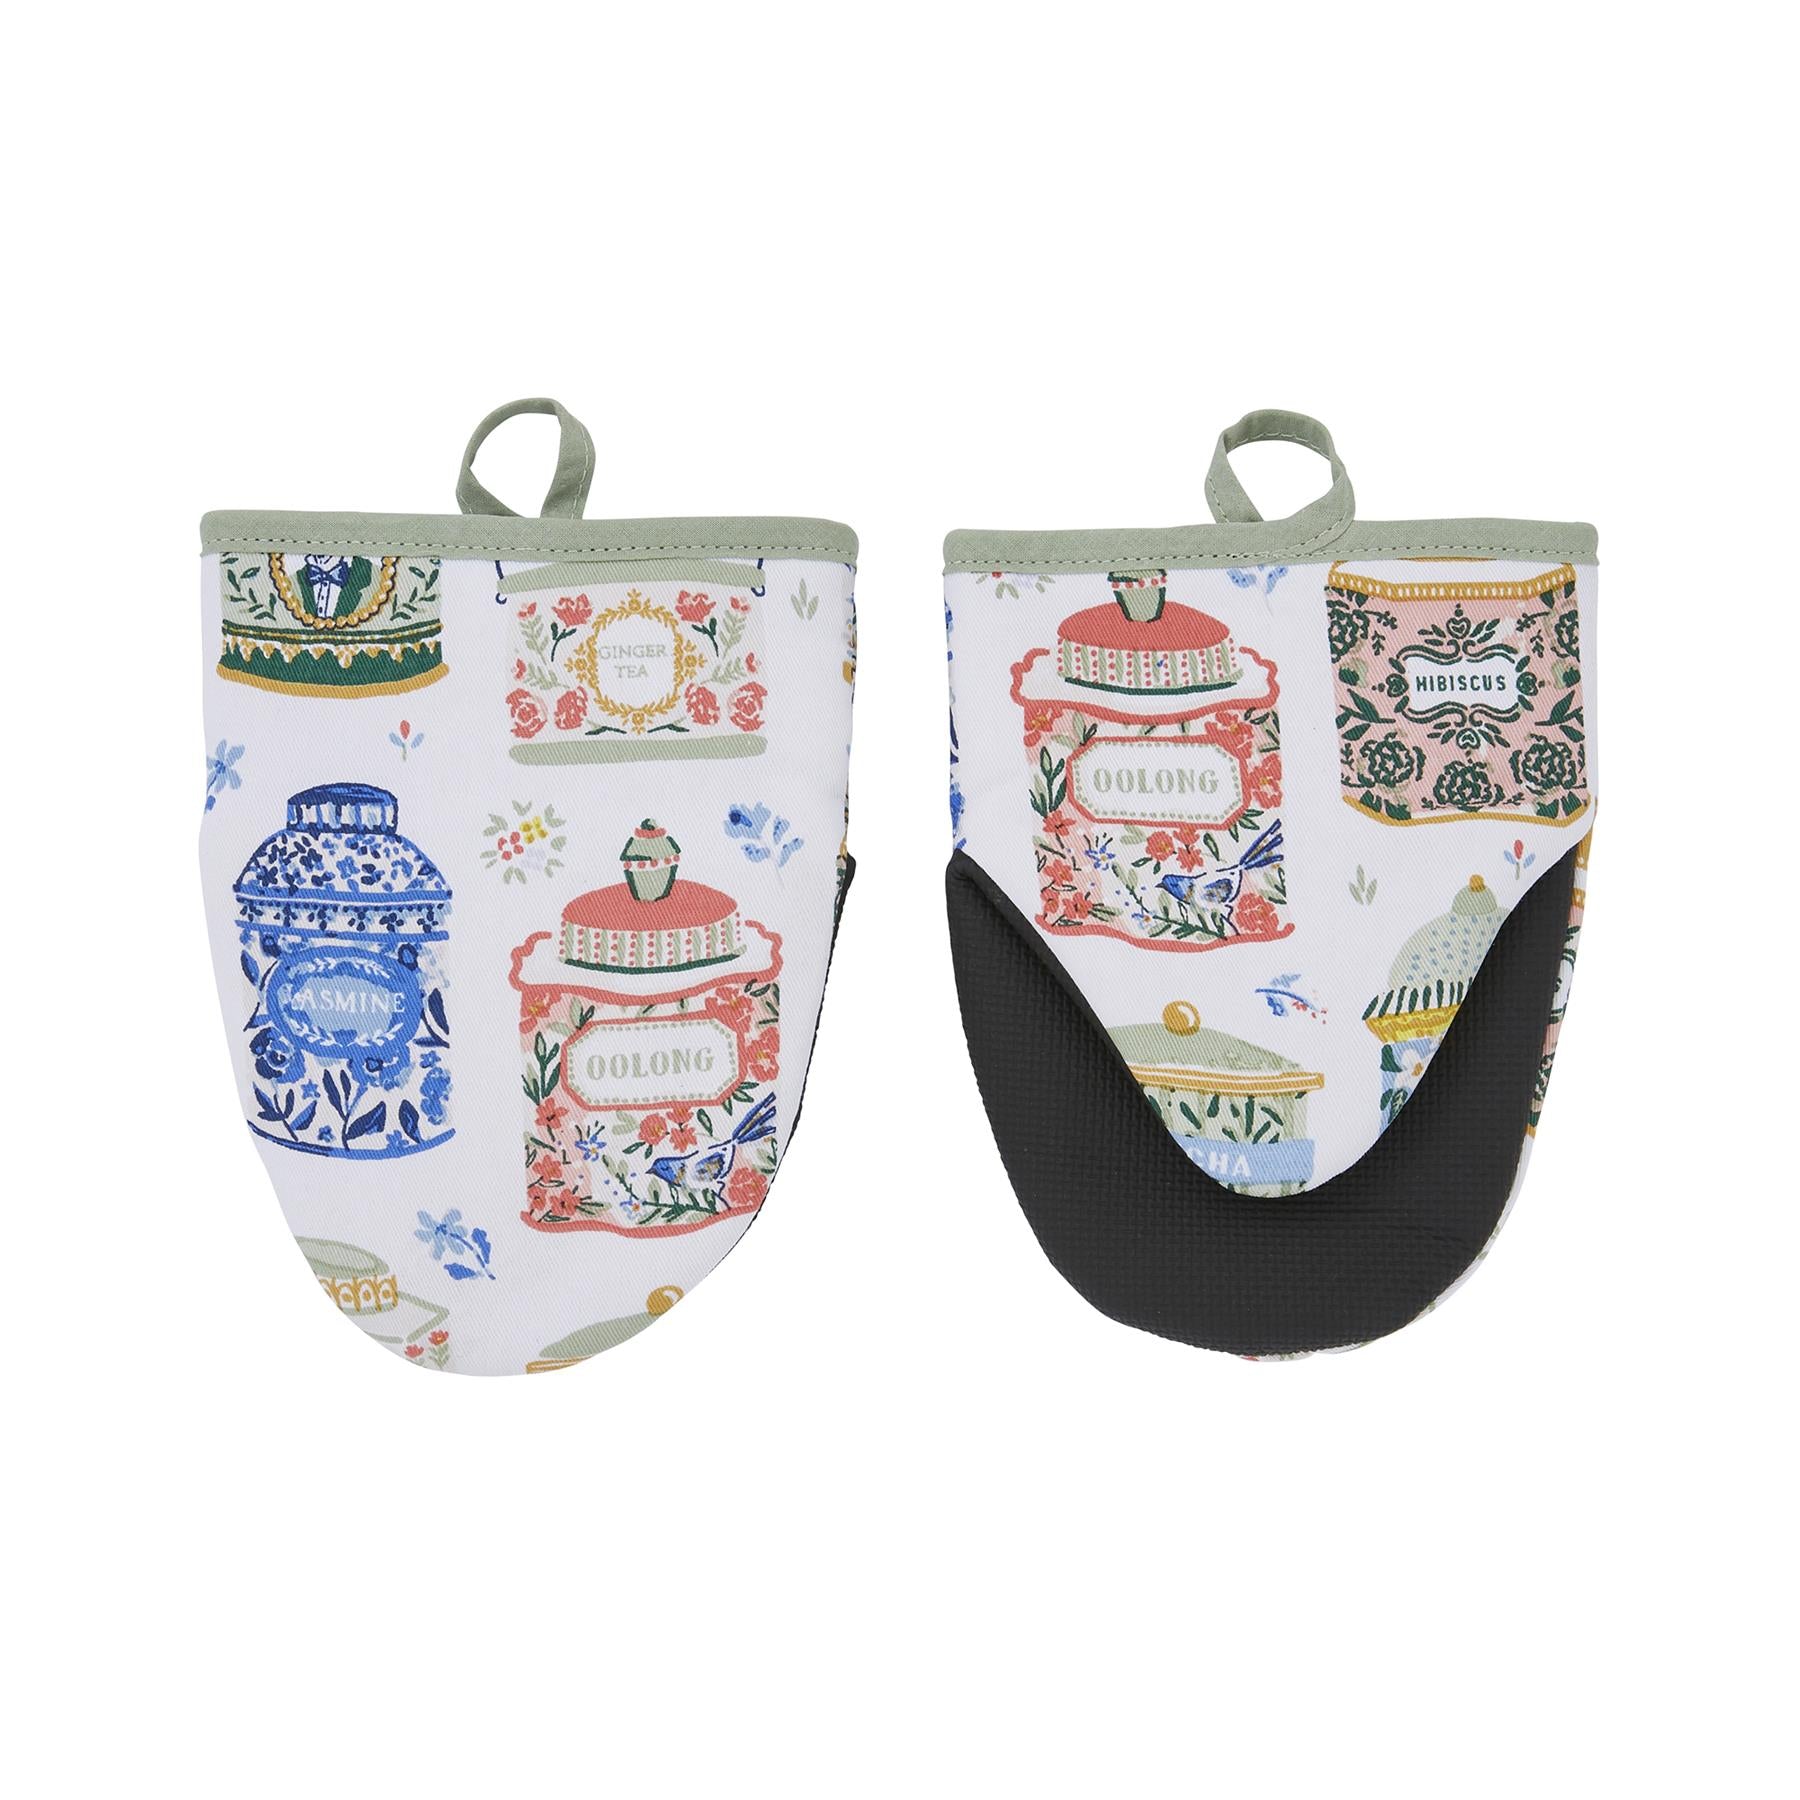 Ulster Weavers Tea Tins Microwave Mitts - Pair One Size in Multi - Micro Mitts - Ulster Weavers